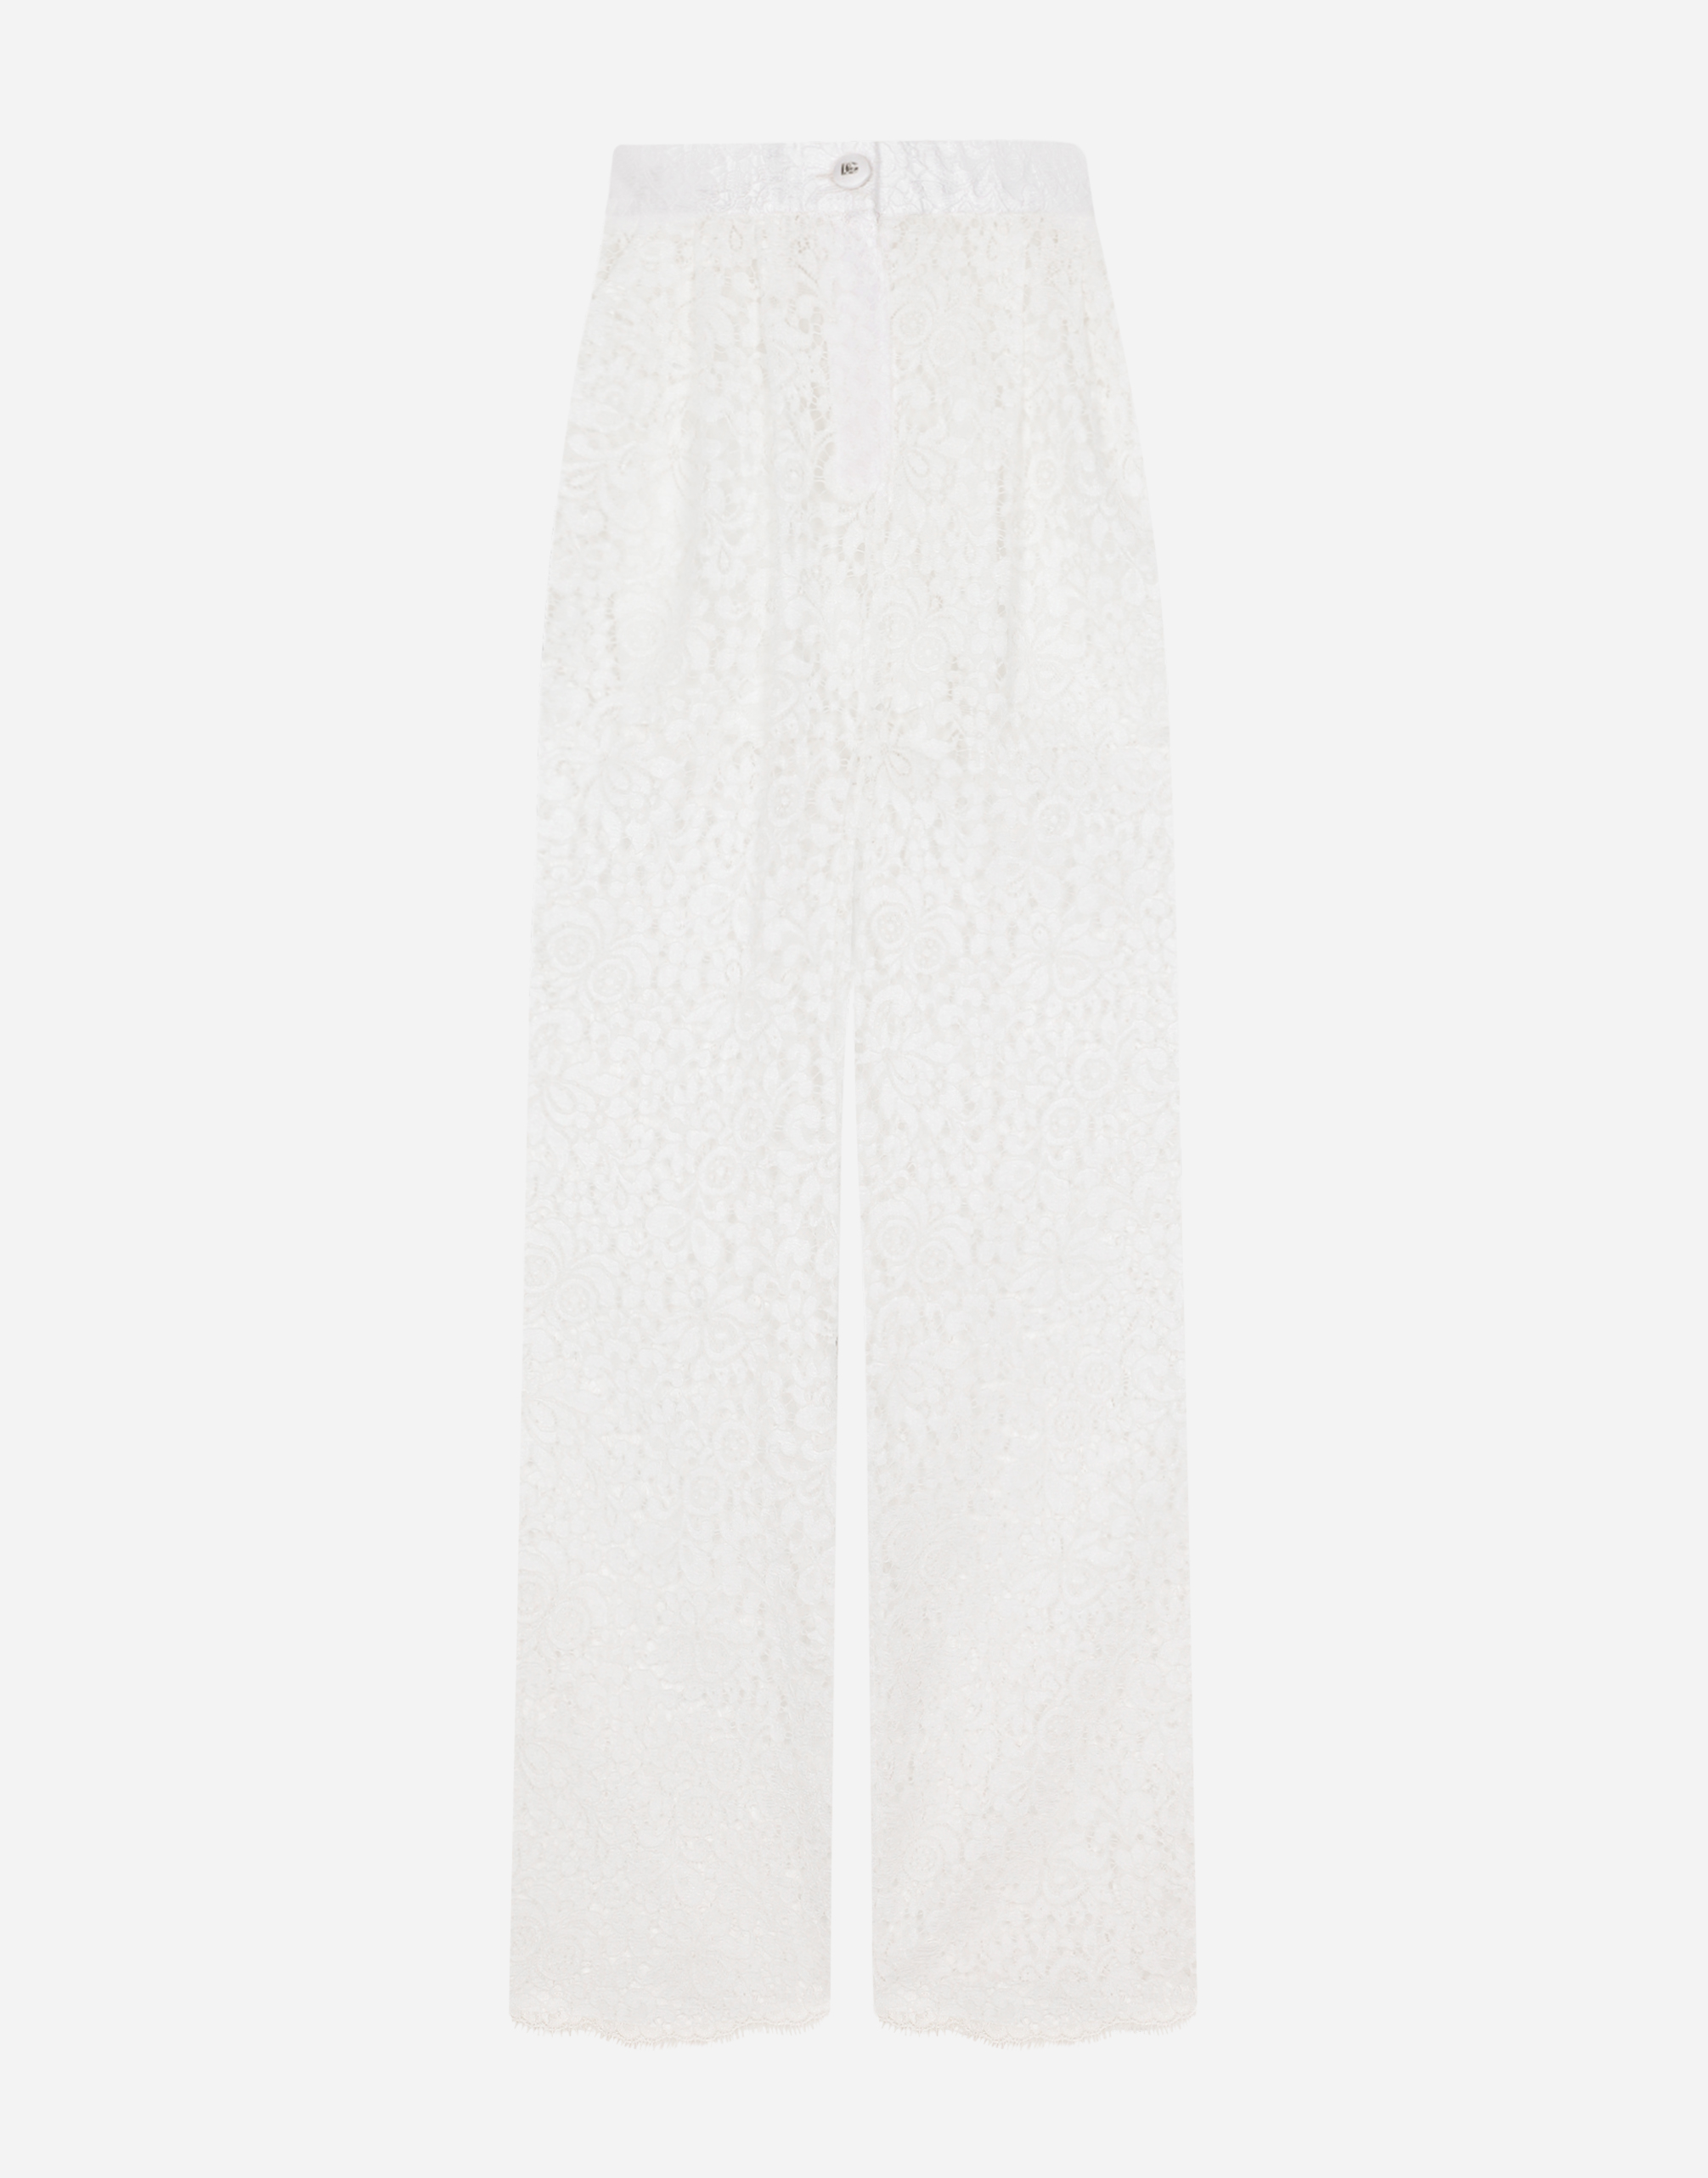 Dolce & Gabbana Flared Floral Cordonetto Lace Pants In White